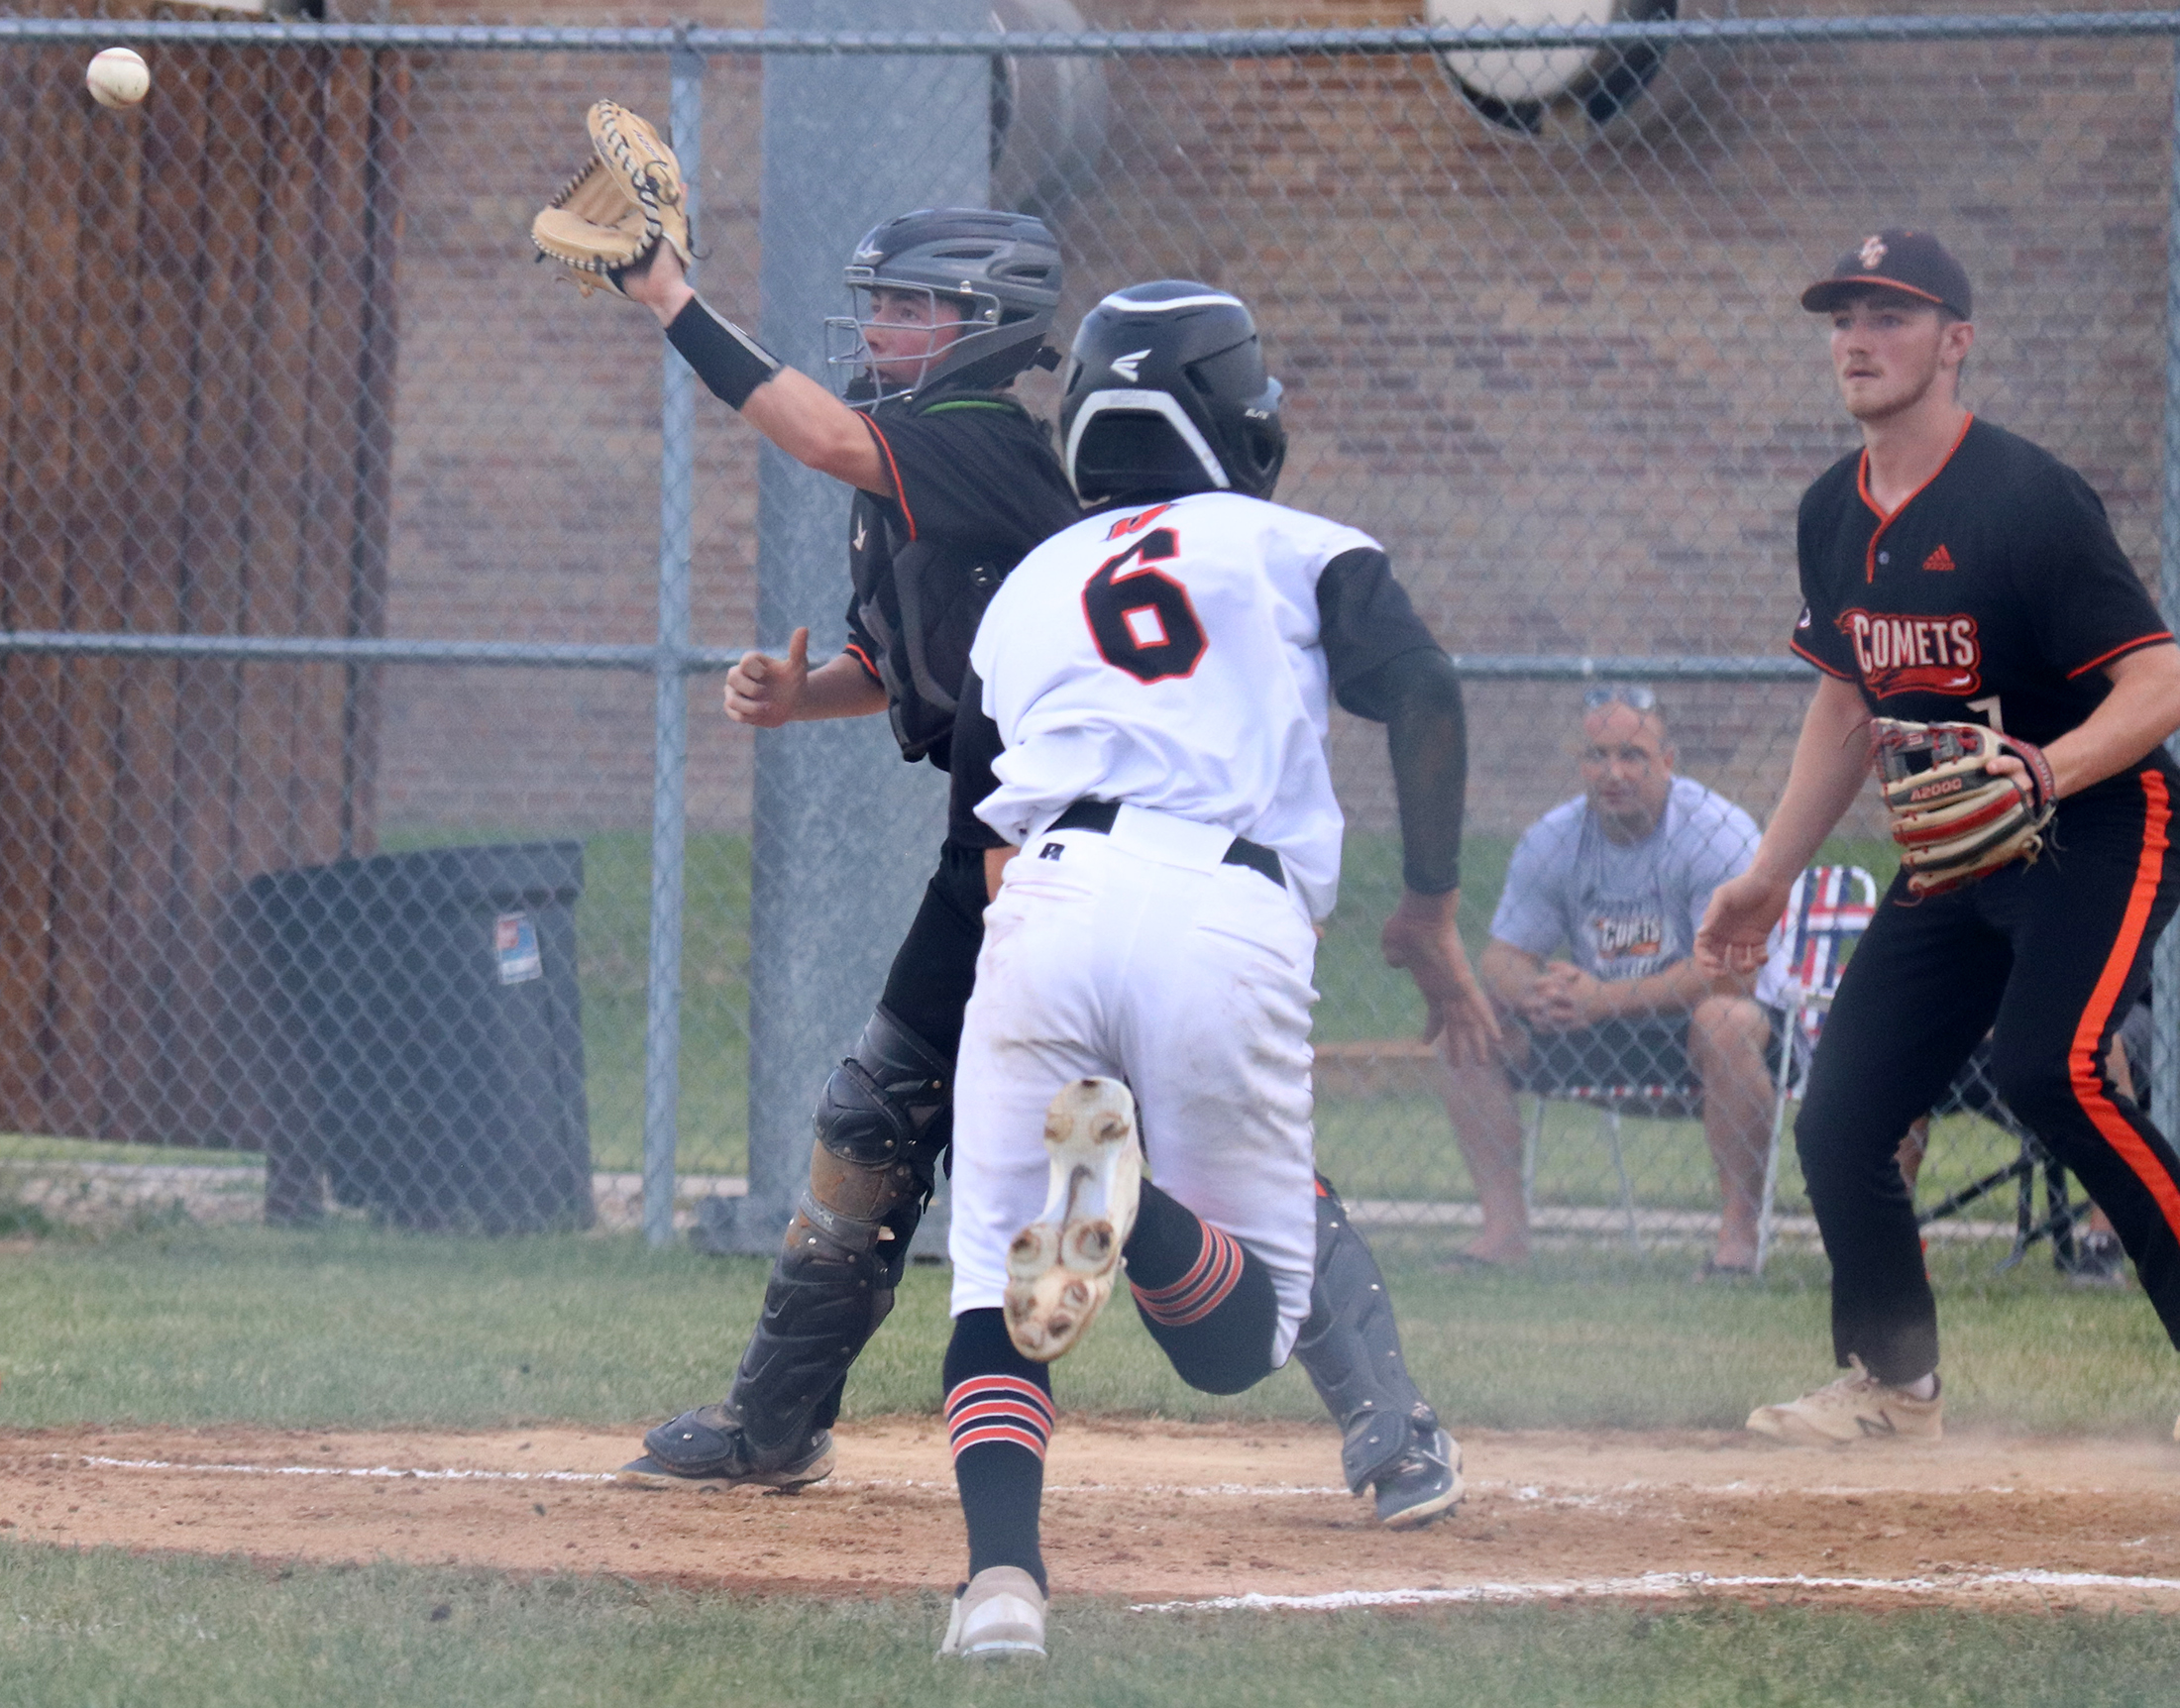 Kayden Blunt hits pair of 3-run HRs, pitches complete-game win as Comets split DH with Indians